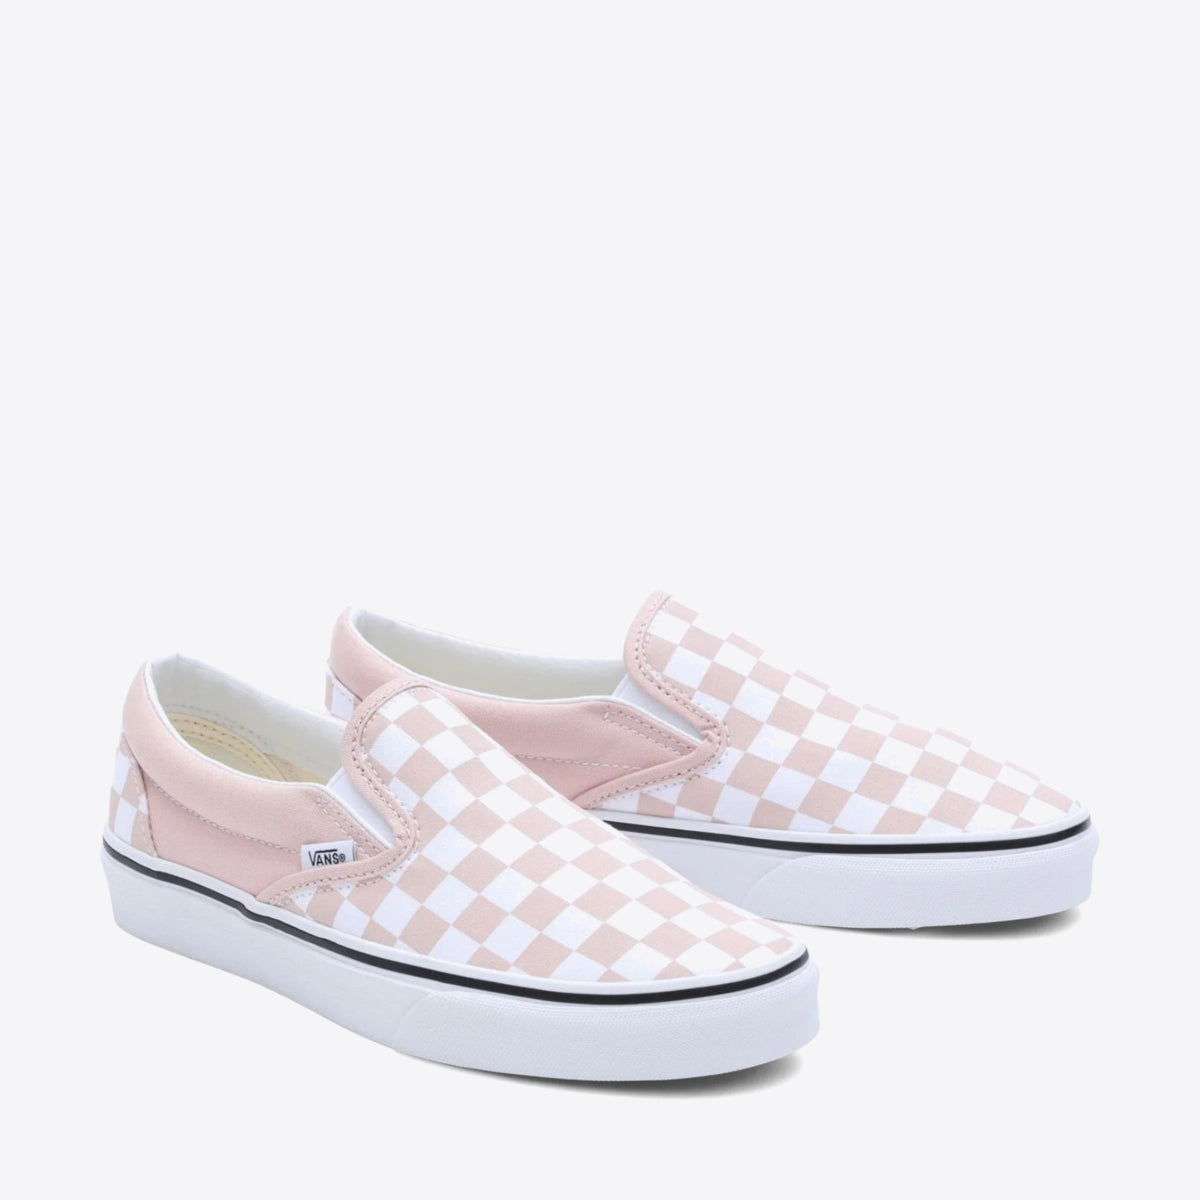 VANS Classic Slip-On Color Theory Checkerboard - Women's Rose Smoke - Image 5